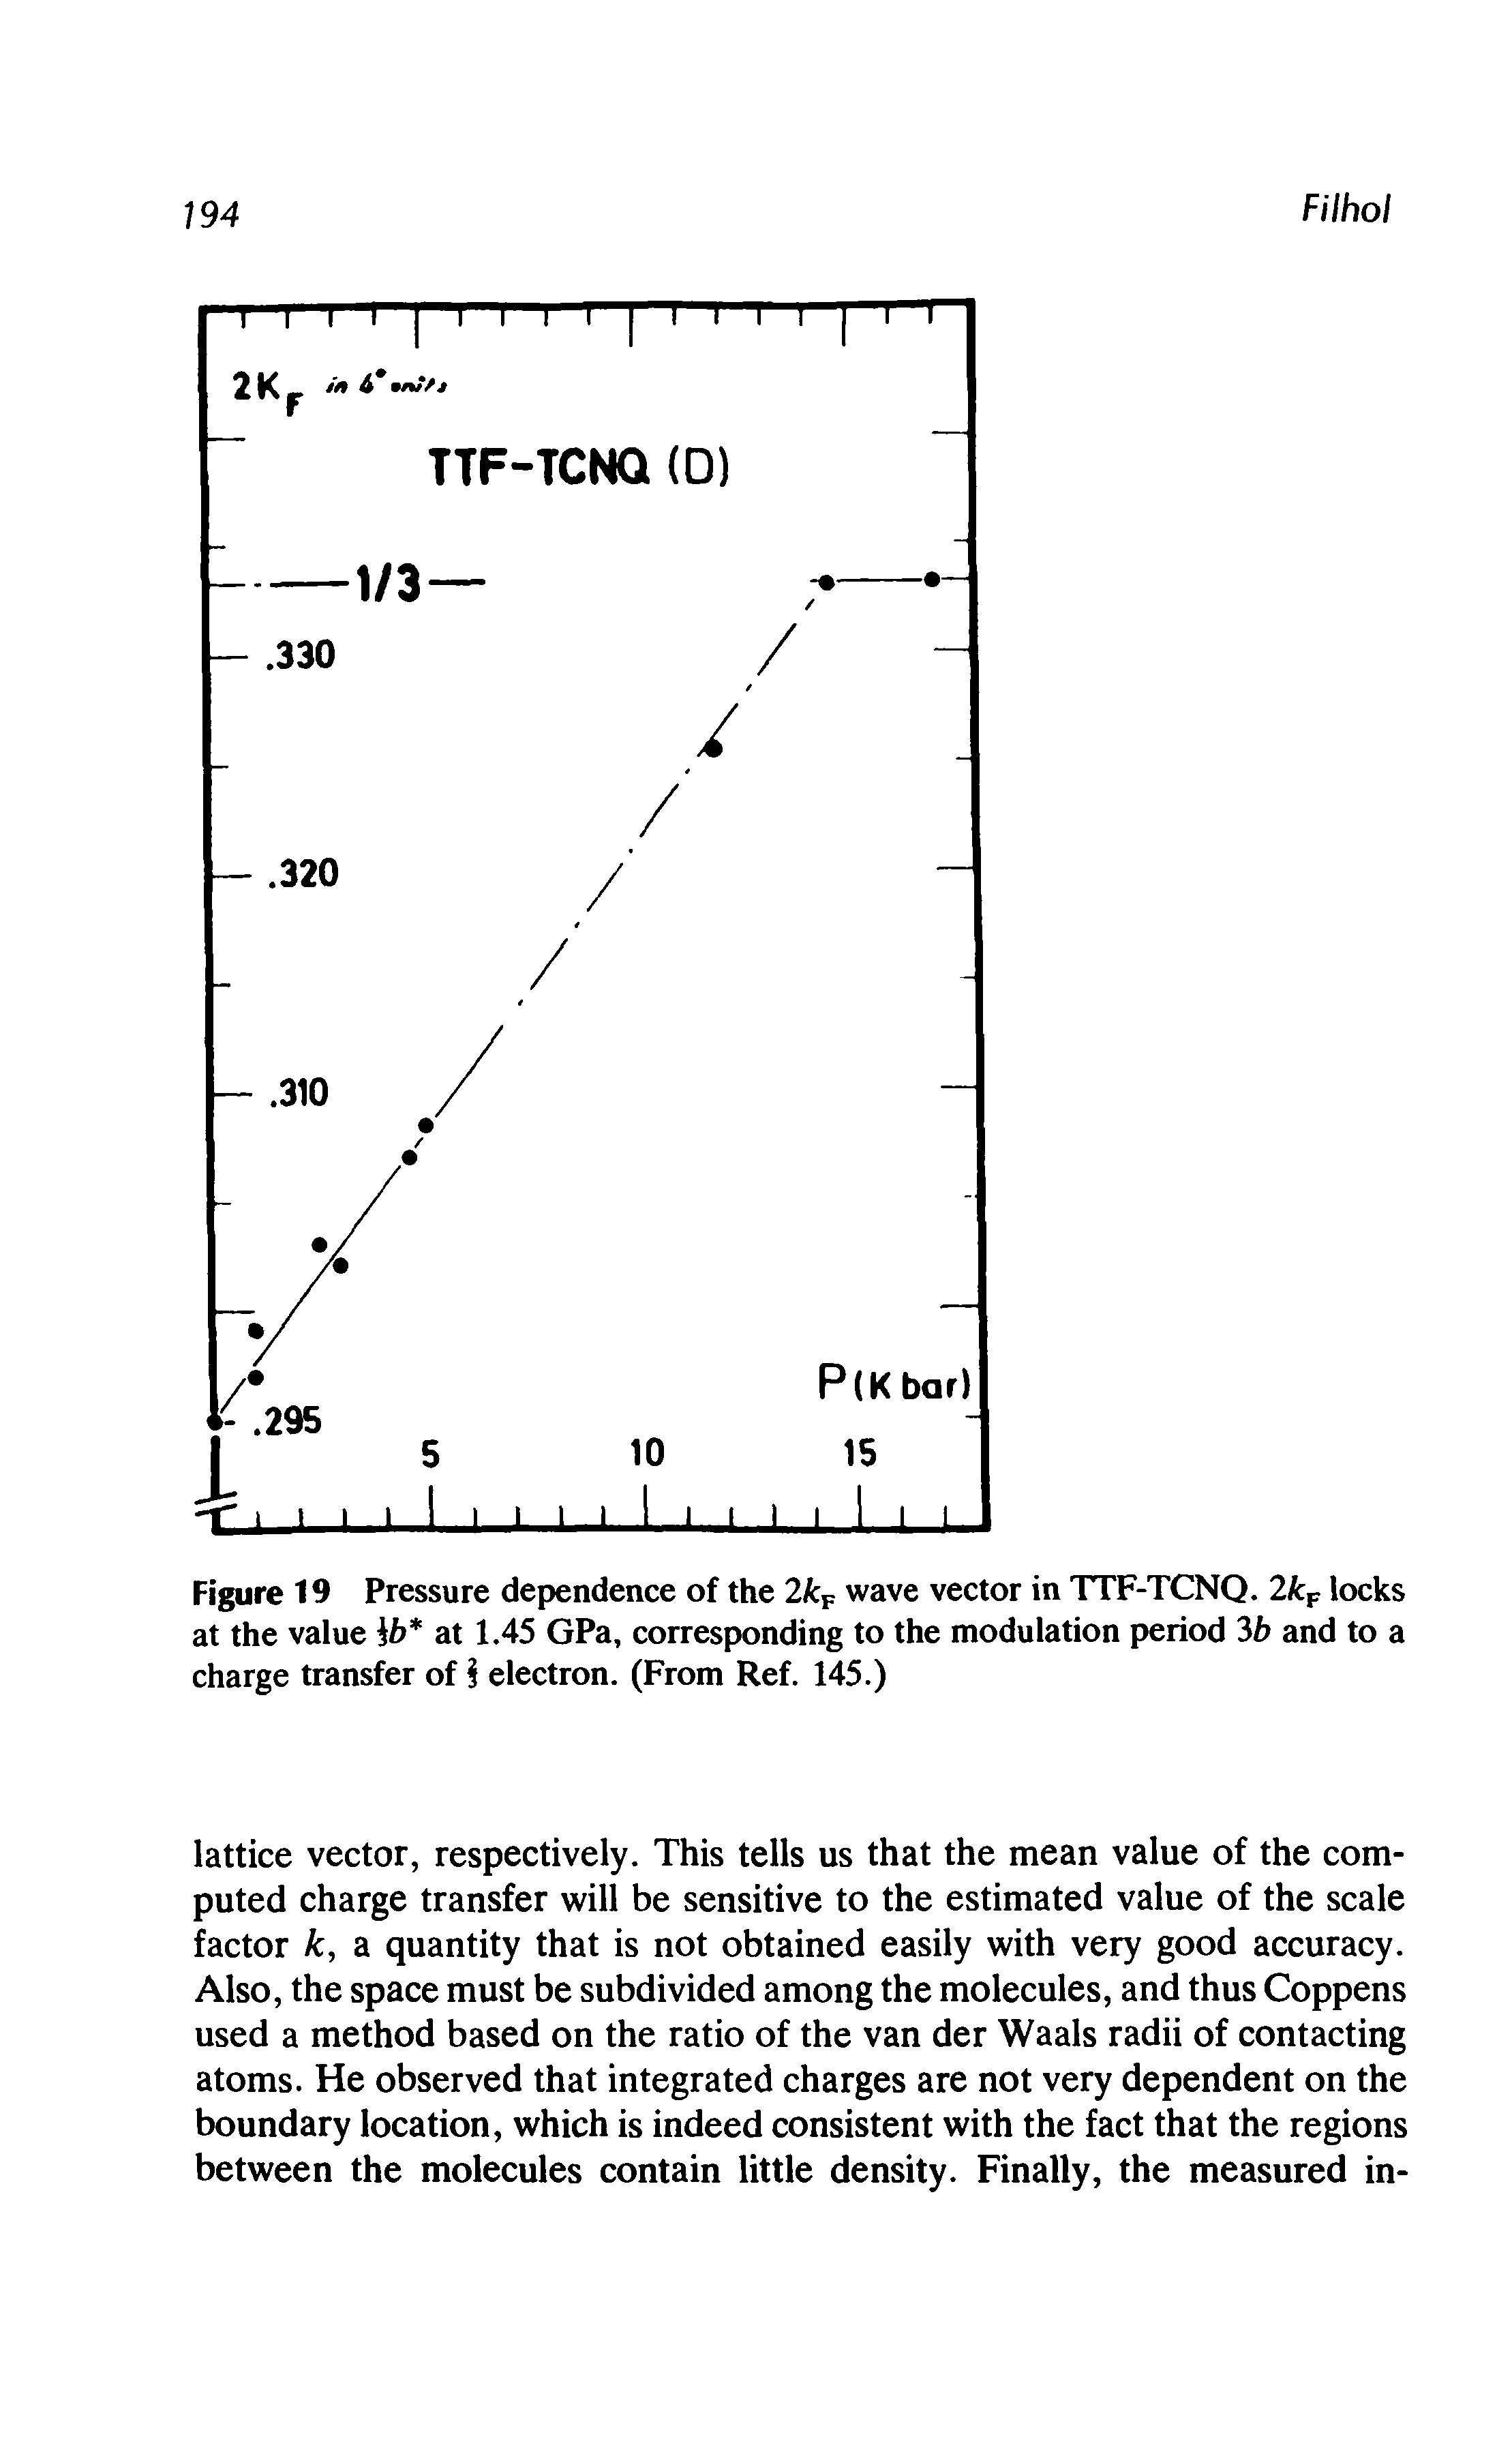 Figure 19 Pressure dependence of the 2kF wave vector in TTF-TCNQ. 2kF locks at the value b at 1.45 GPa, corresponding to the modulation period 3b and to a charge transfer of electron. (From Ref. 145.)...